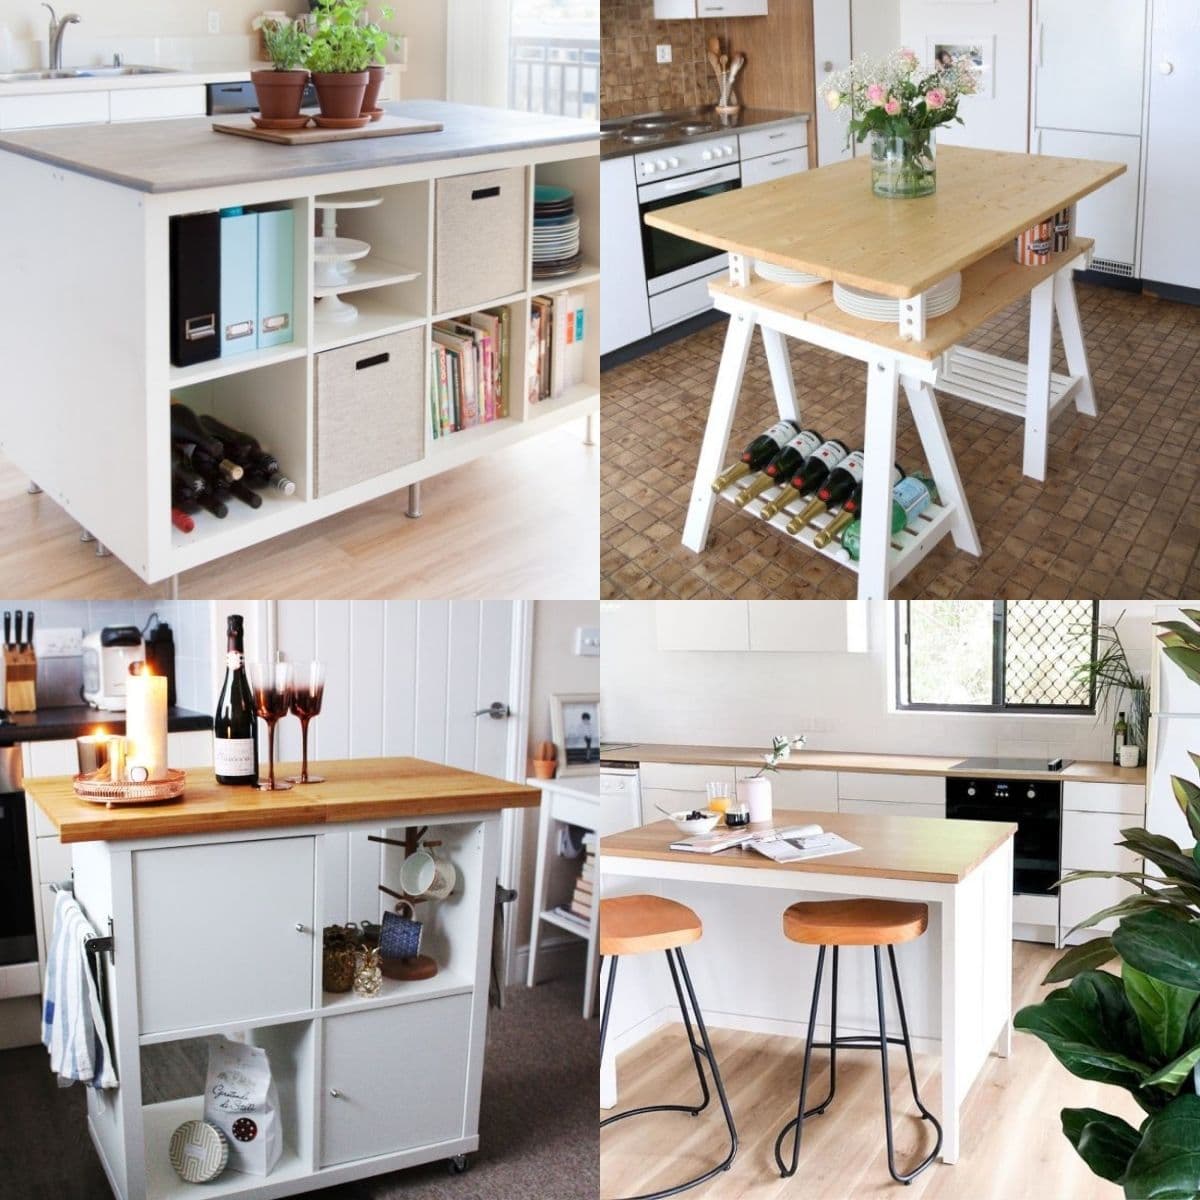 Looking for a perfect kitchen island but have a low budget? 👀

These IKEA kitchen island hacks might be just what you need right now. 😉

#kitchen #design #kitchenislandideas
 #jillfitzrealestate #boston
 LocalInfoForYou.com/376078/ikea-ki…